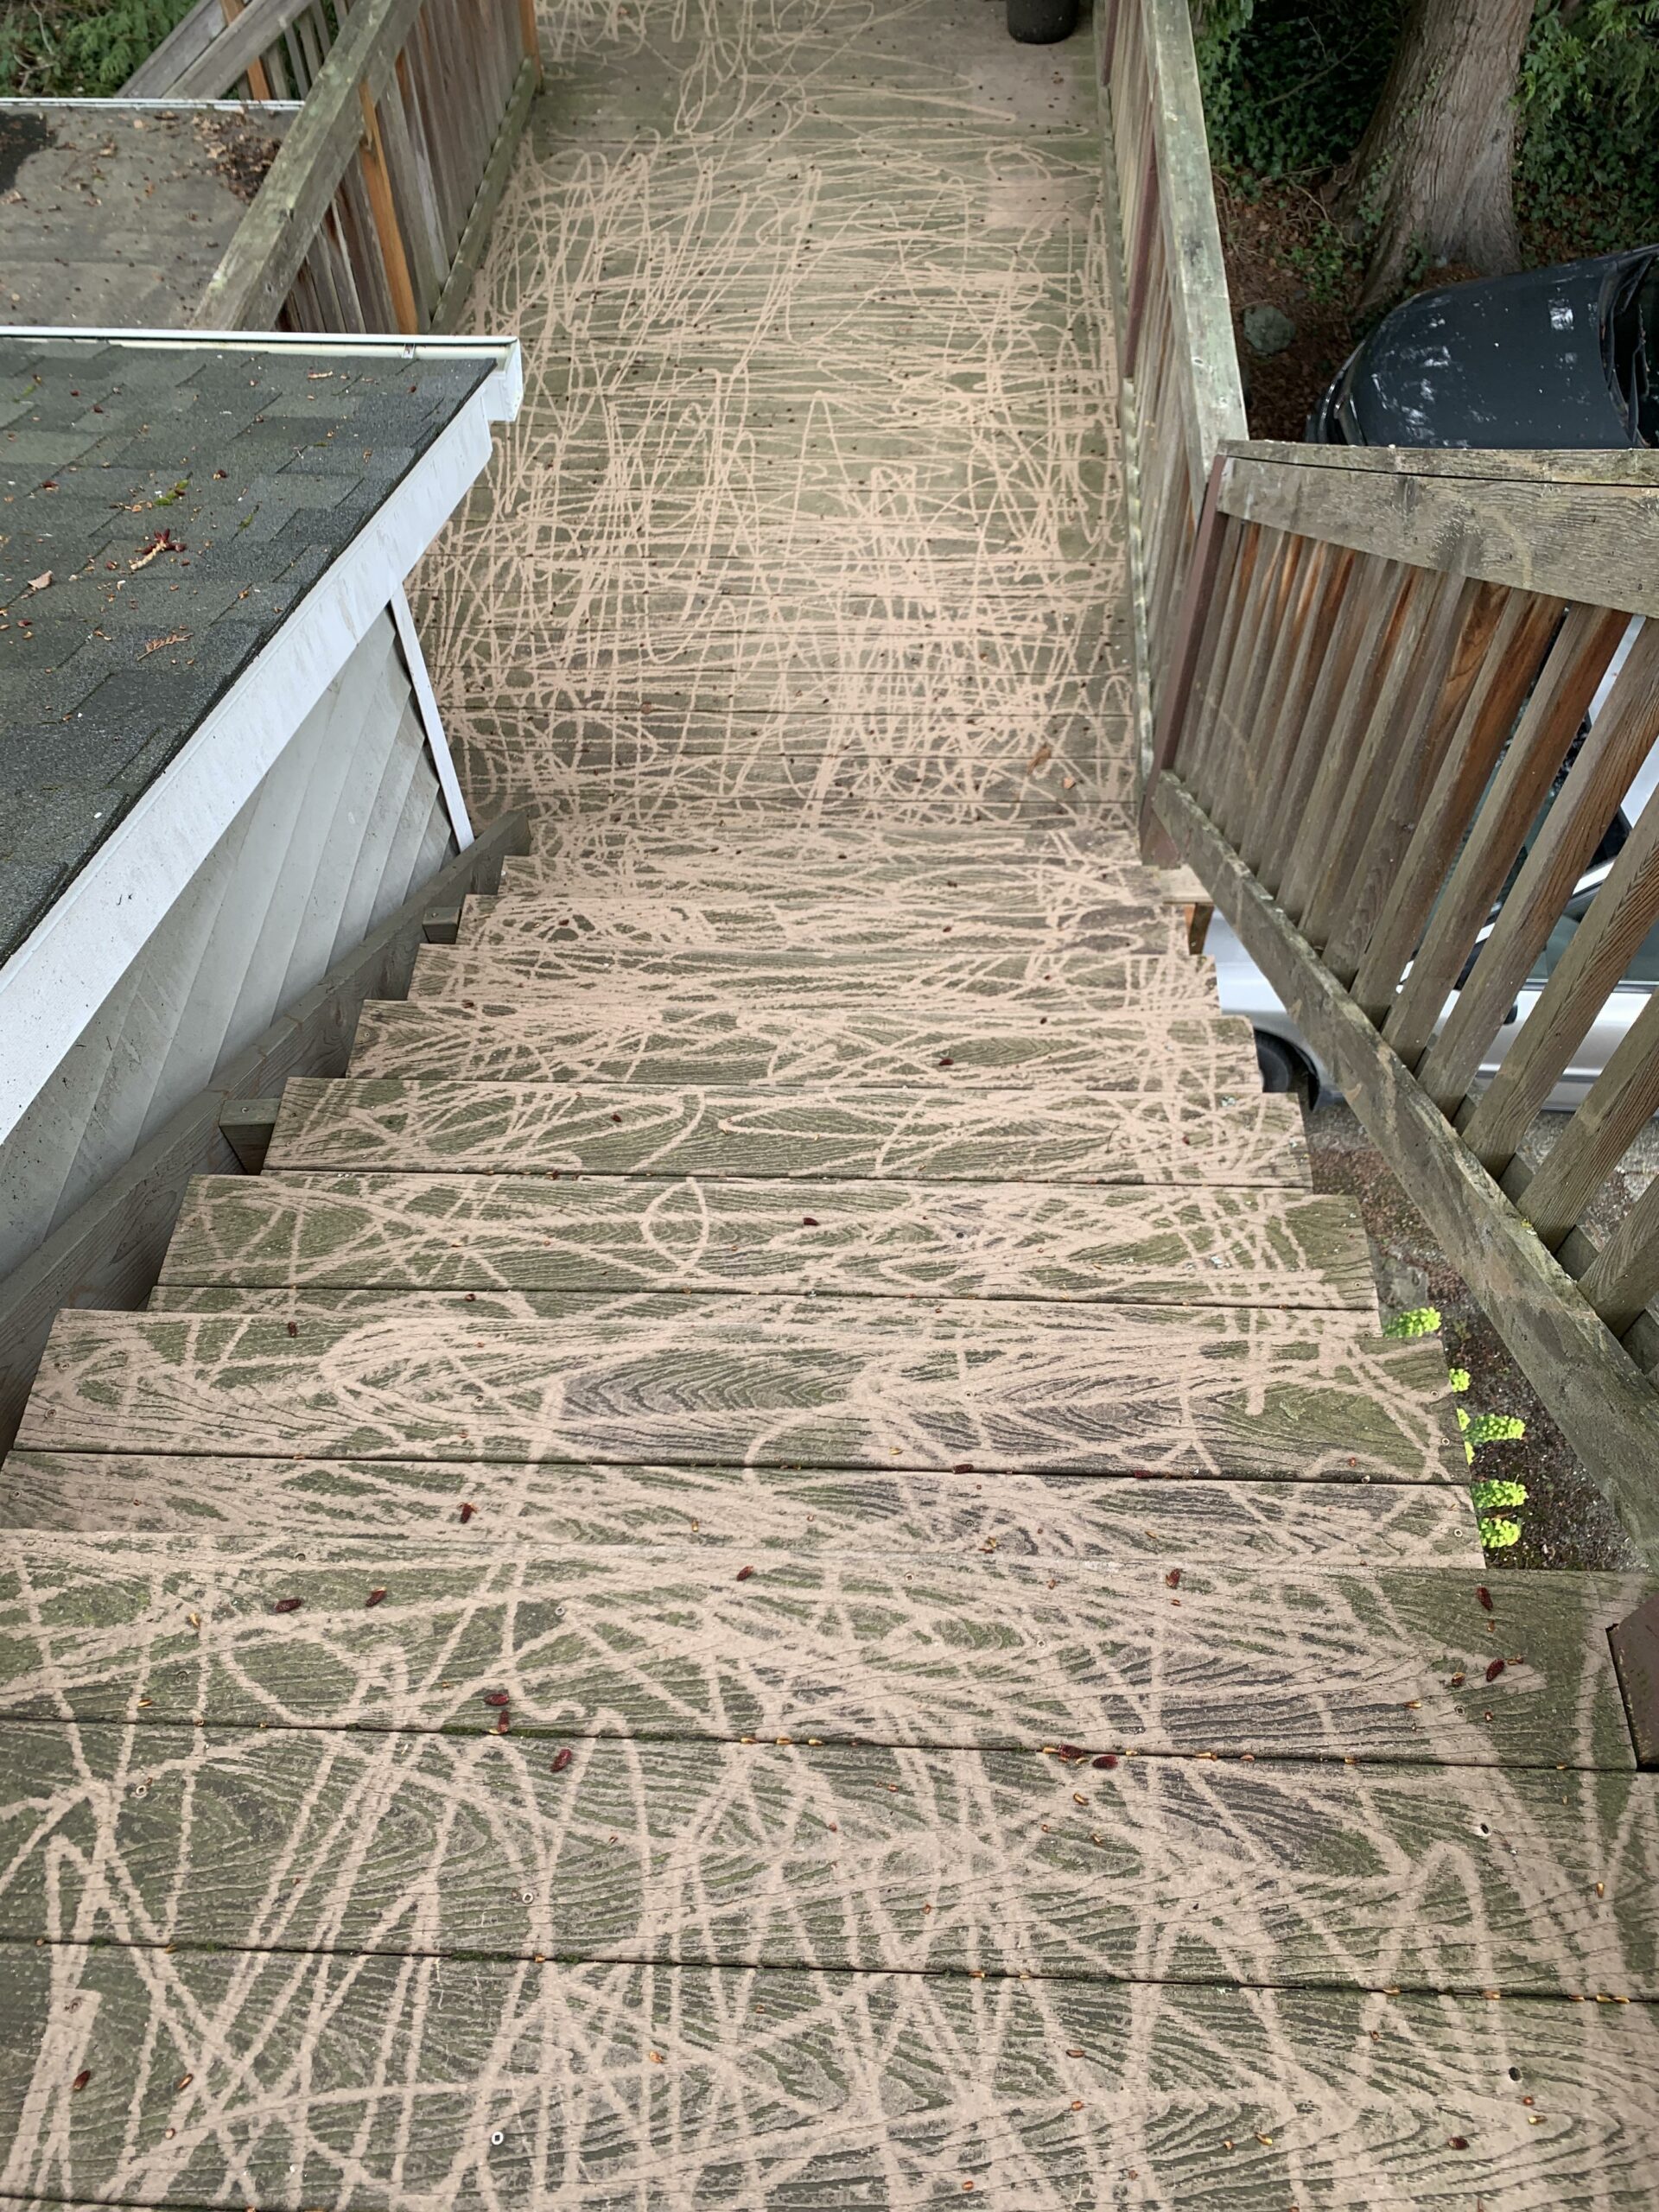 “My landlord told me he’d pressure wash my deck…”